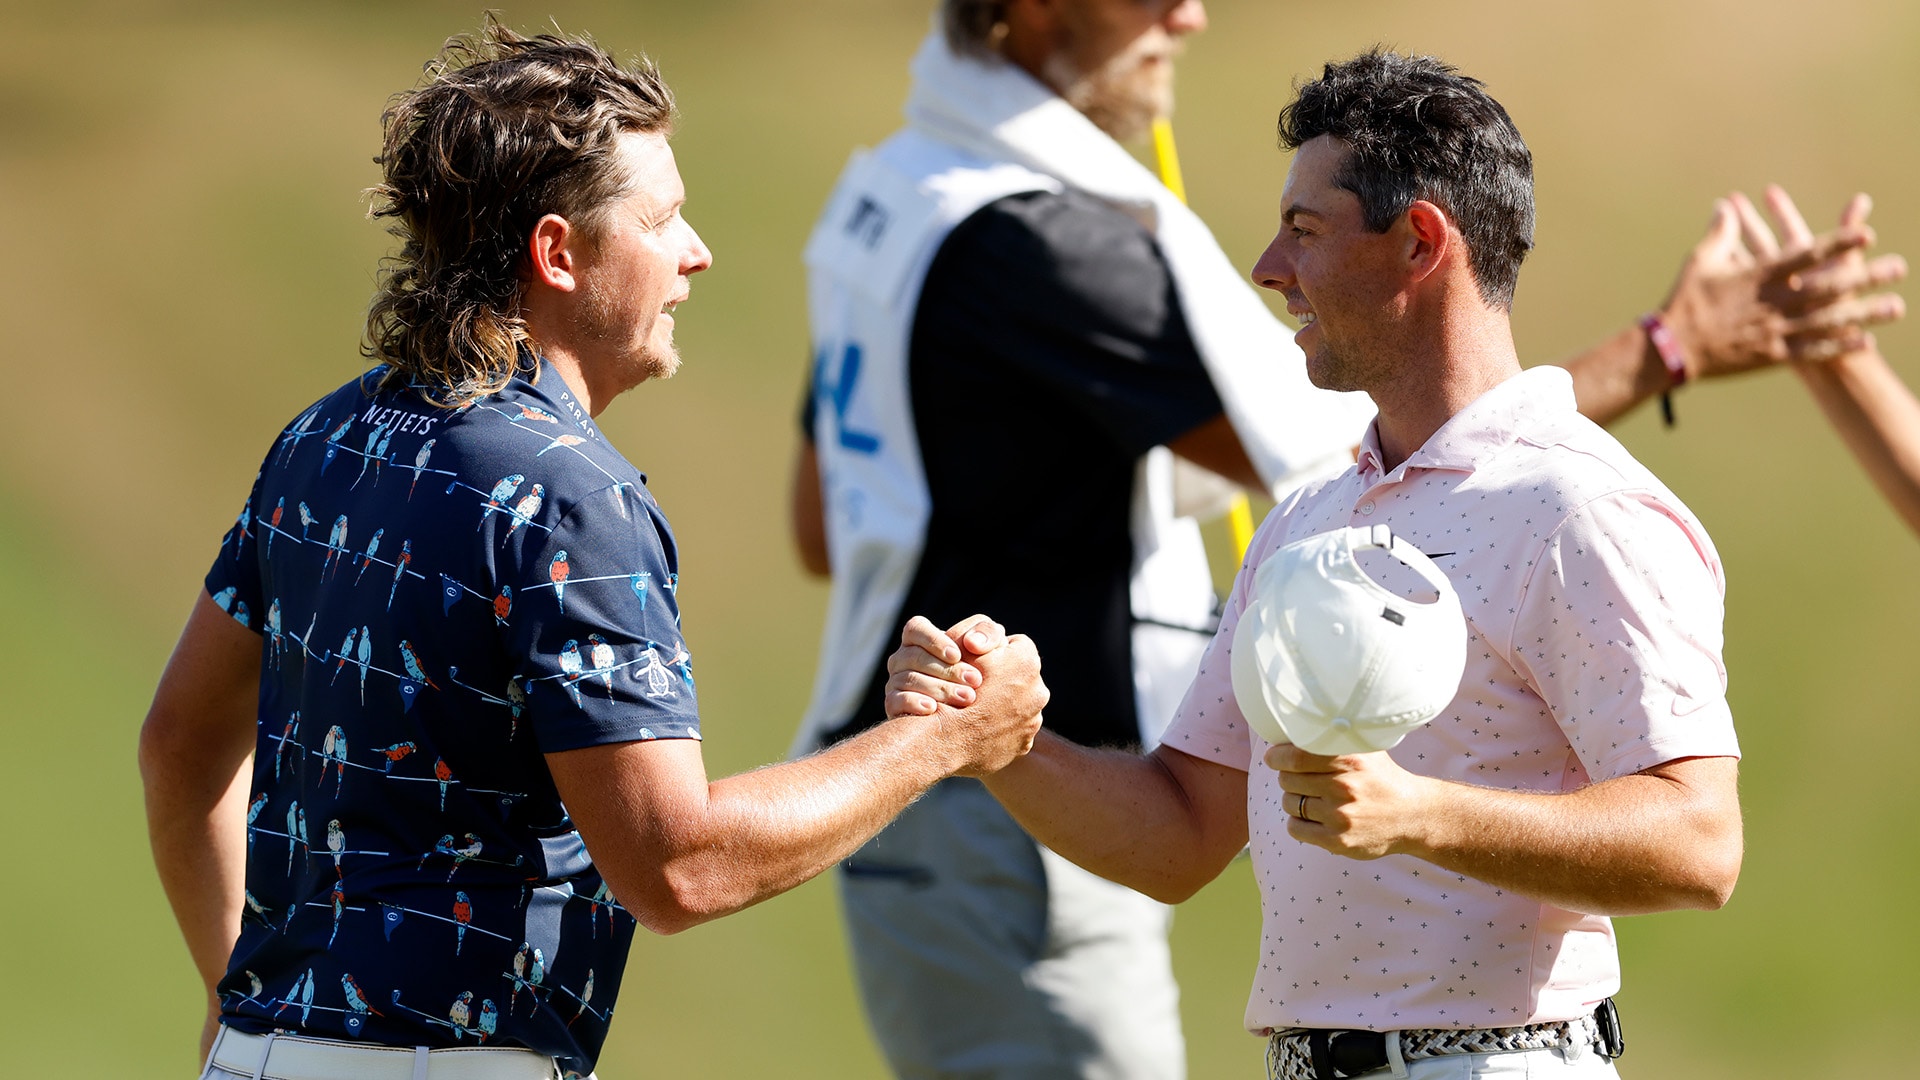 Open odds at the halfway point: Cam Smith favored, Rory McIlroy a close second